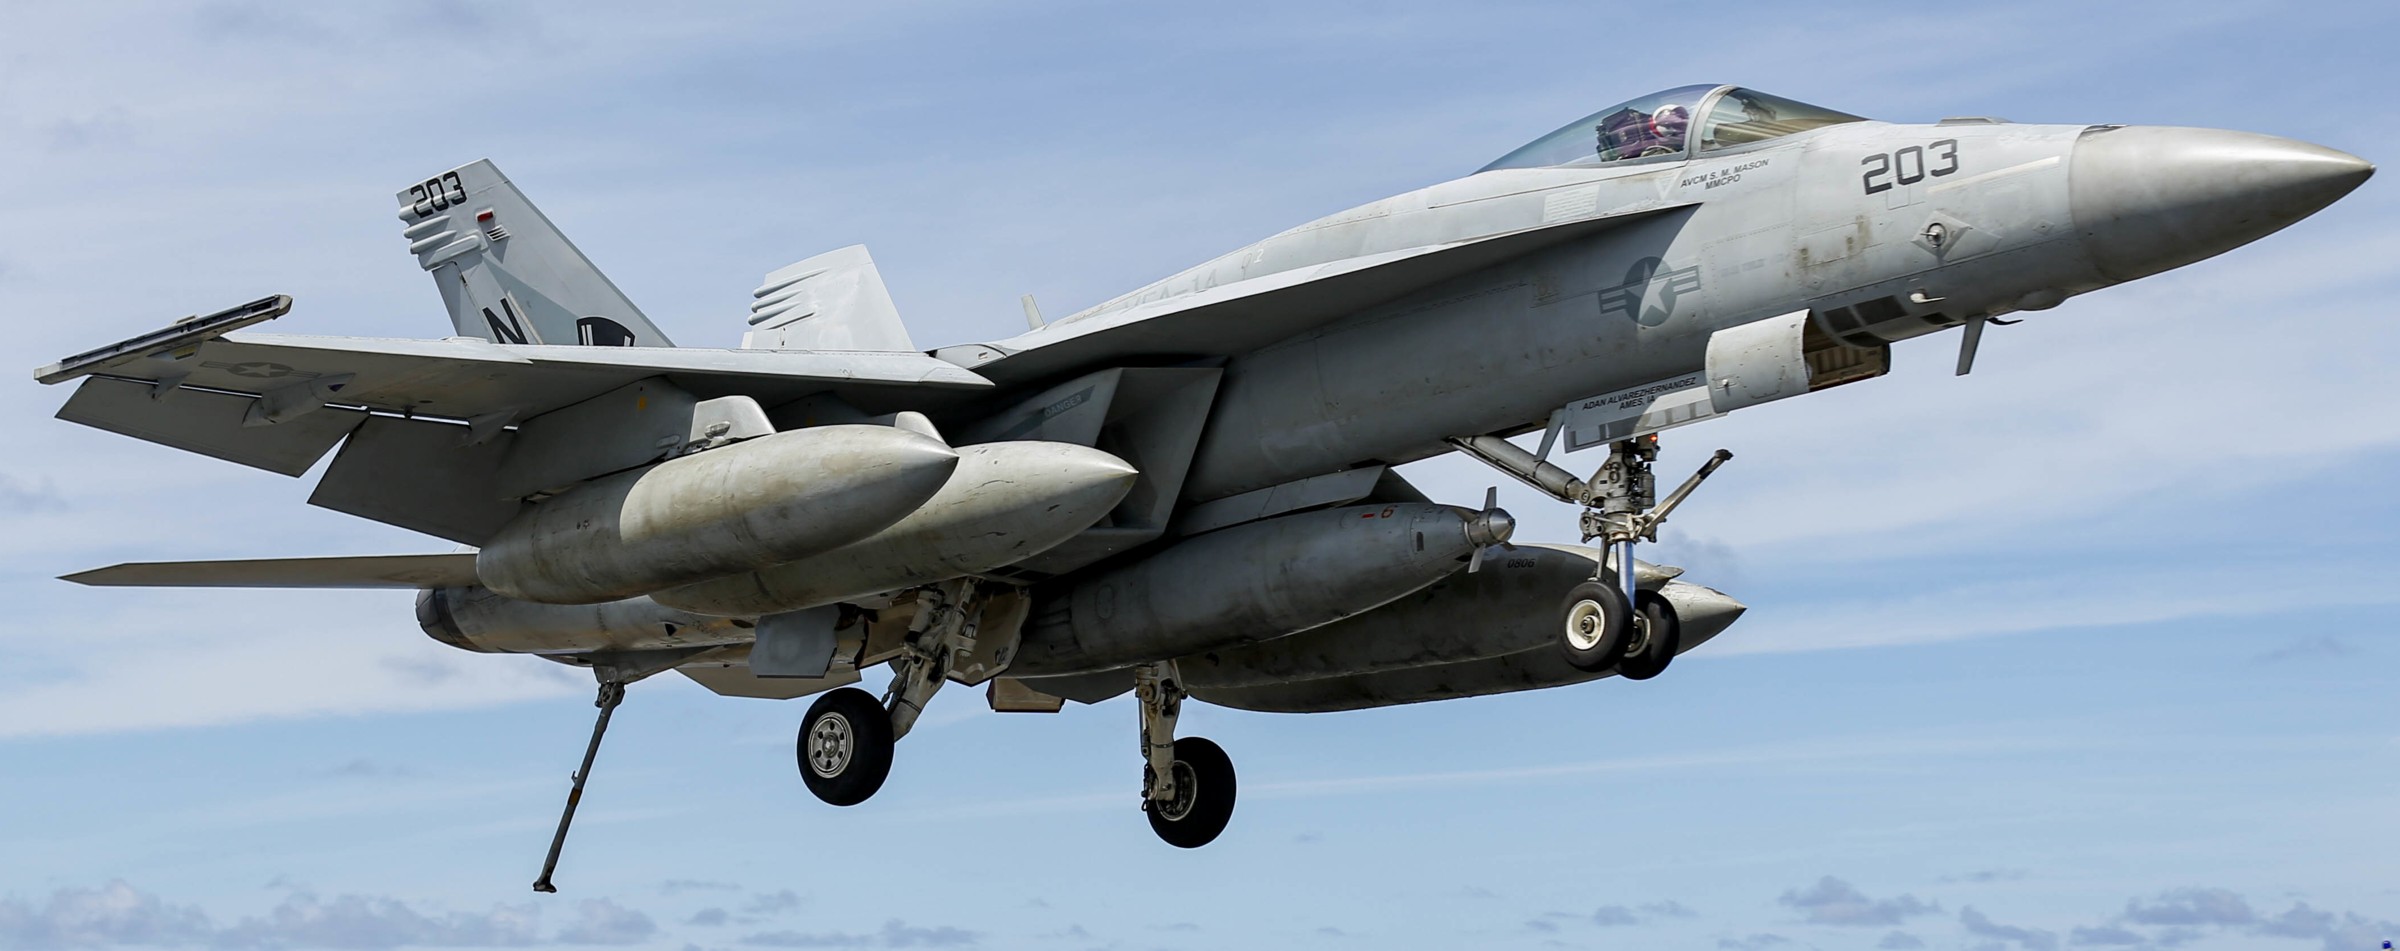 vfa-14 tophatters strike fighter squadron f/a-18e super hornet cvn-72 uss abraham lincoln cvw-9 us navy 78